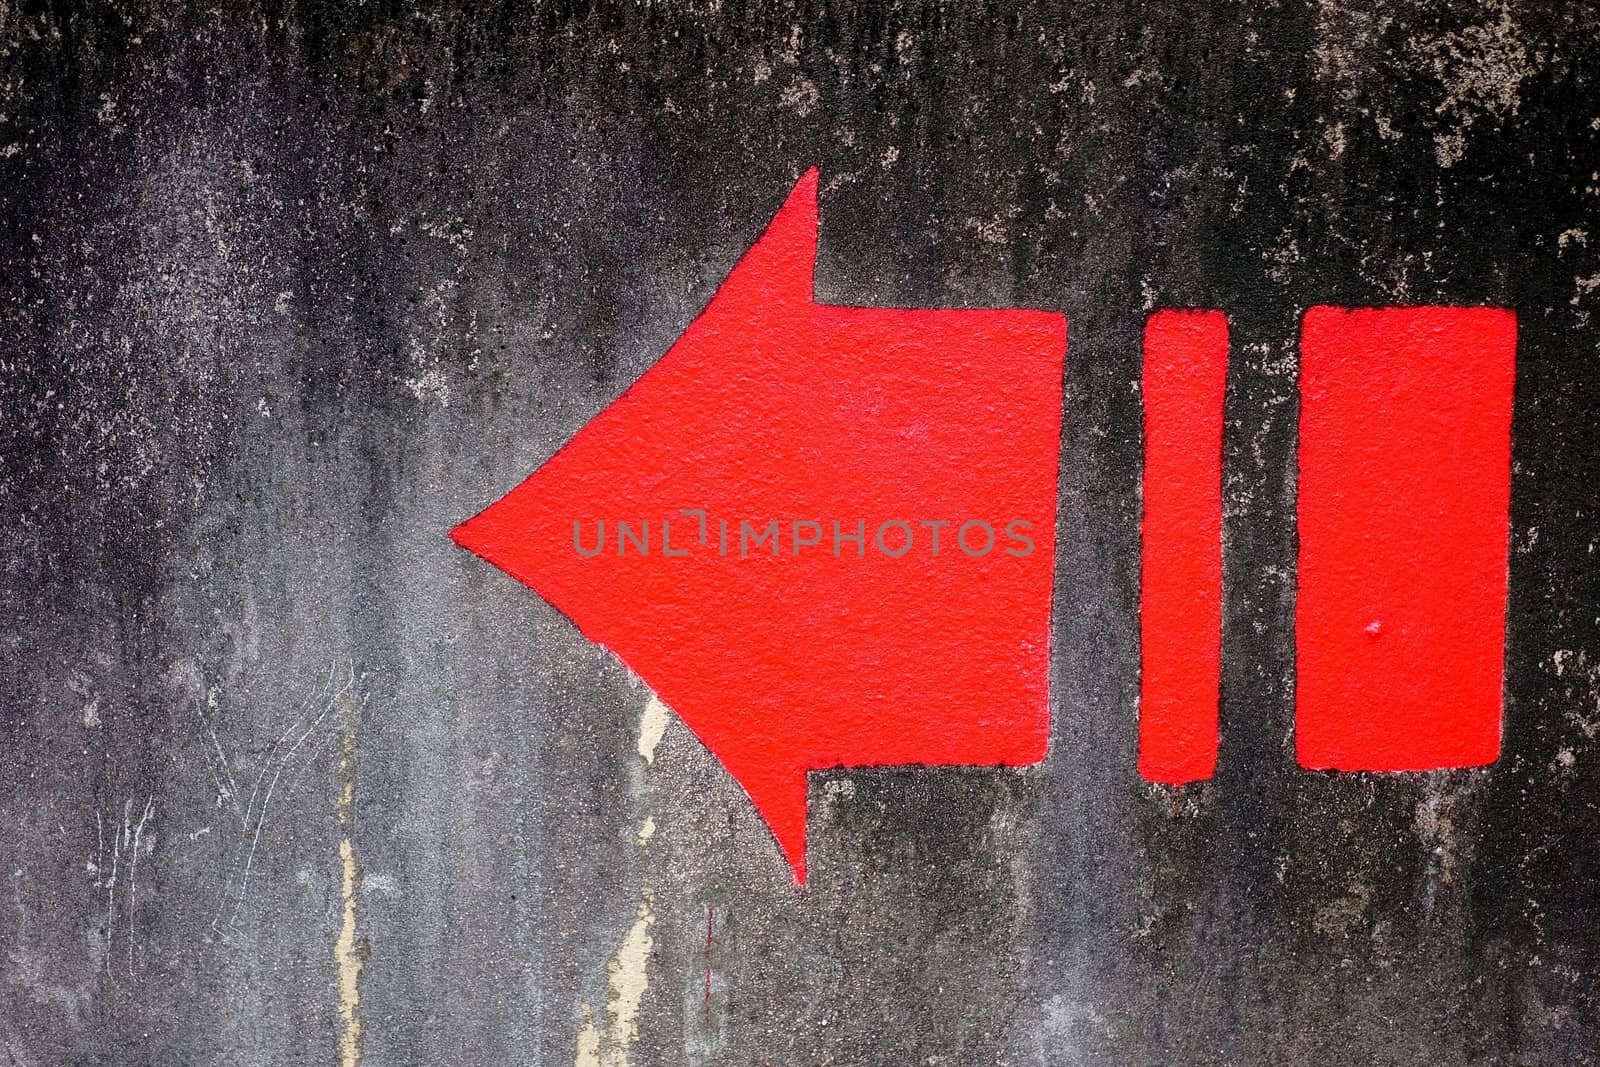 Red Arrow on Grunge Concrete Wall Background.